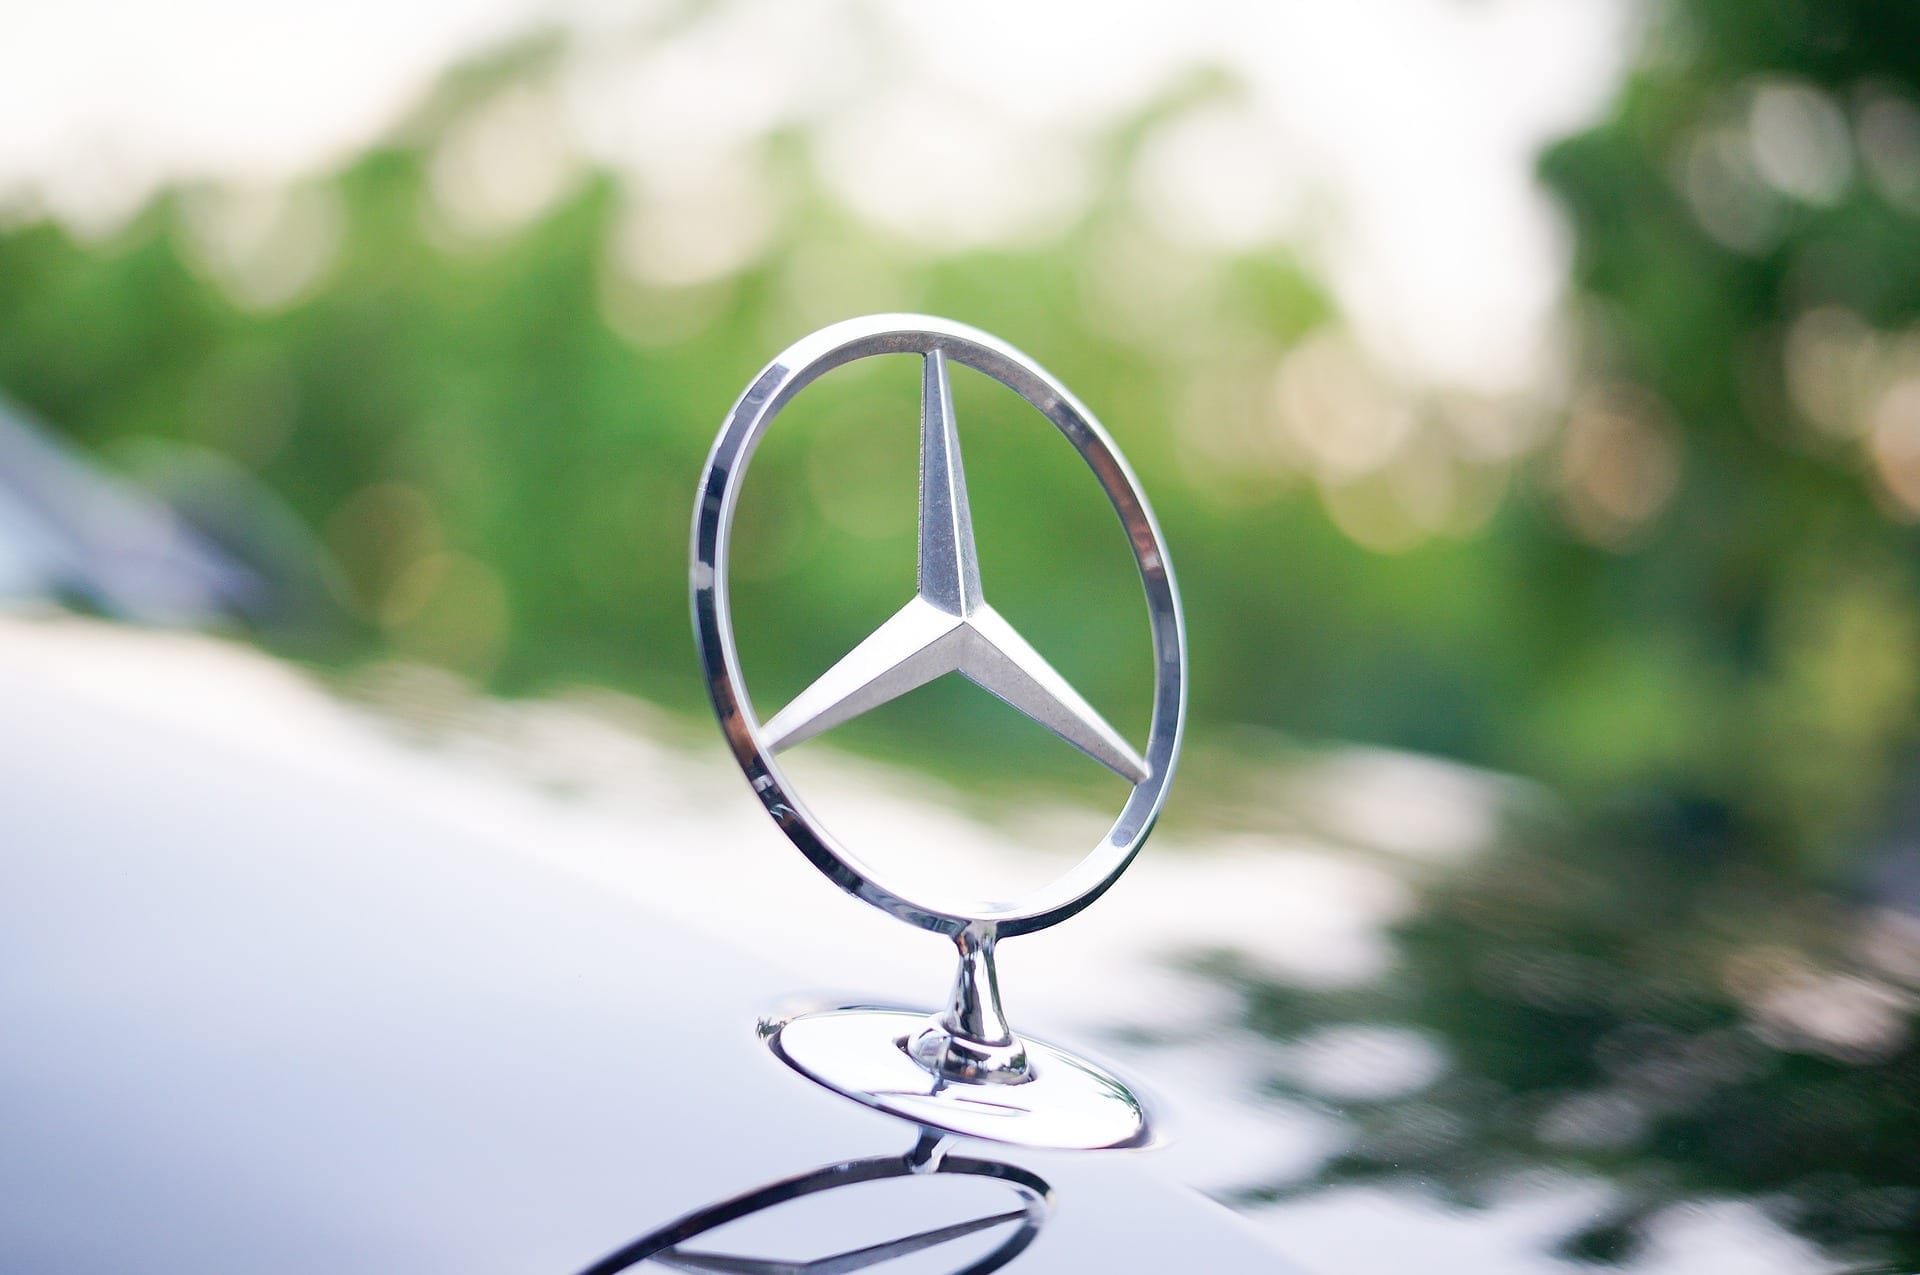 The famous three pointed Mercedes Benz star